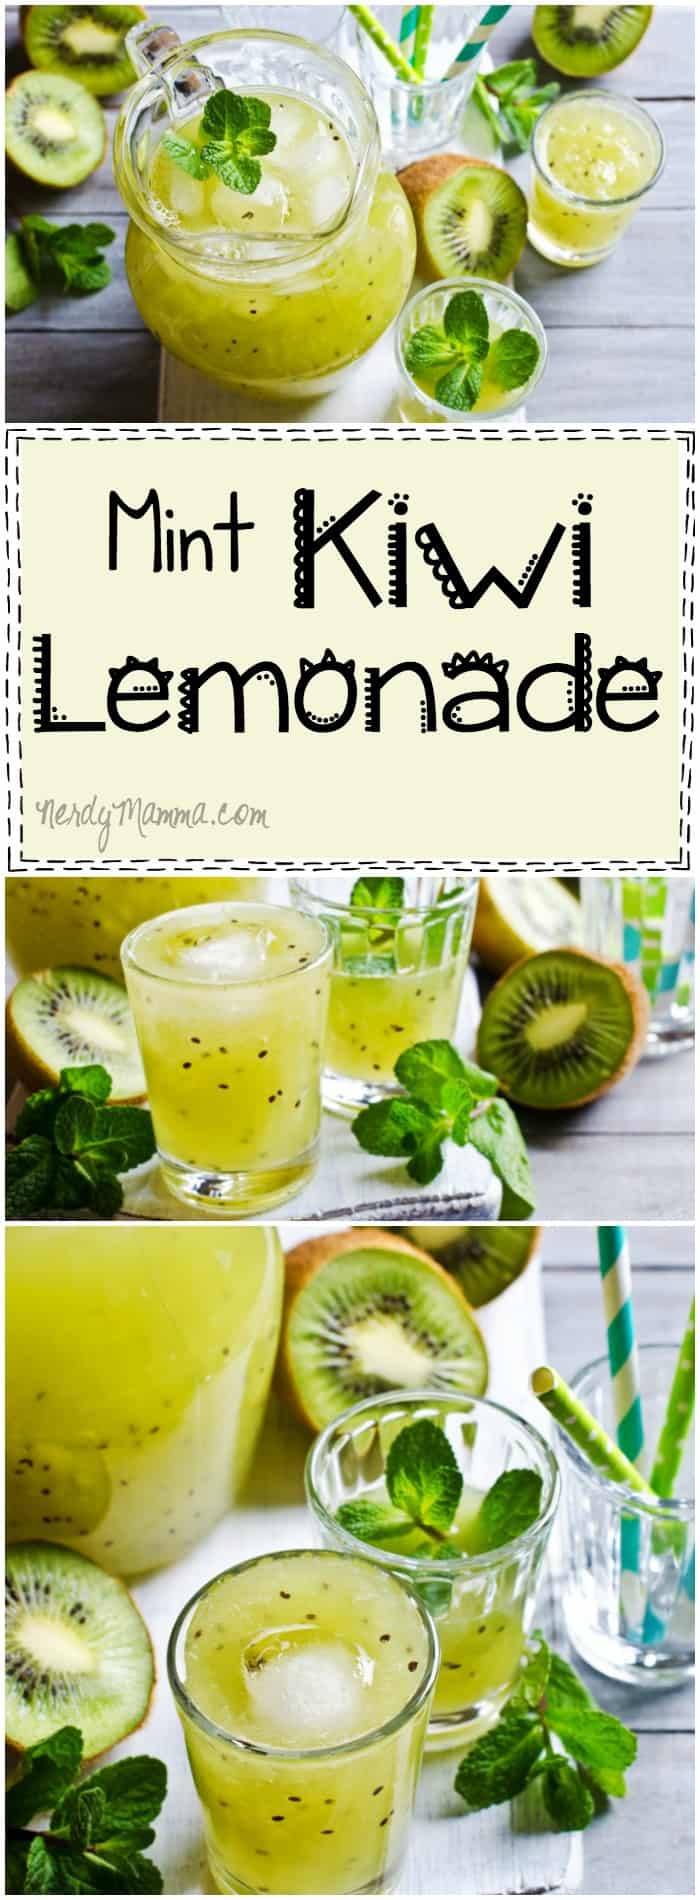 I love this easy recipe for mint kiwi lemonade. What a fun twist on a traditional drink recipe! LOL!